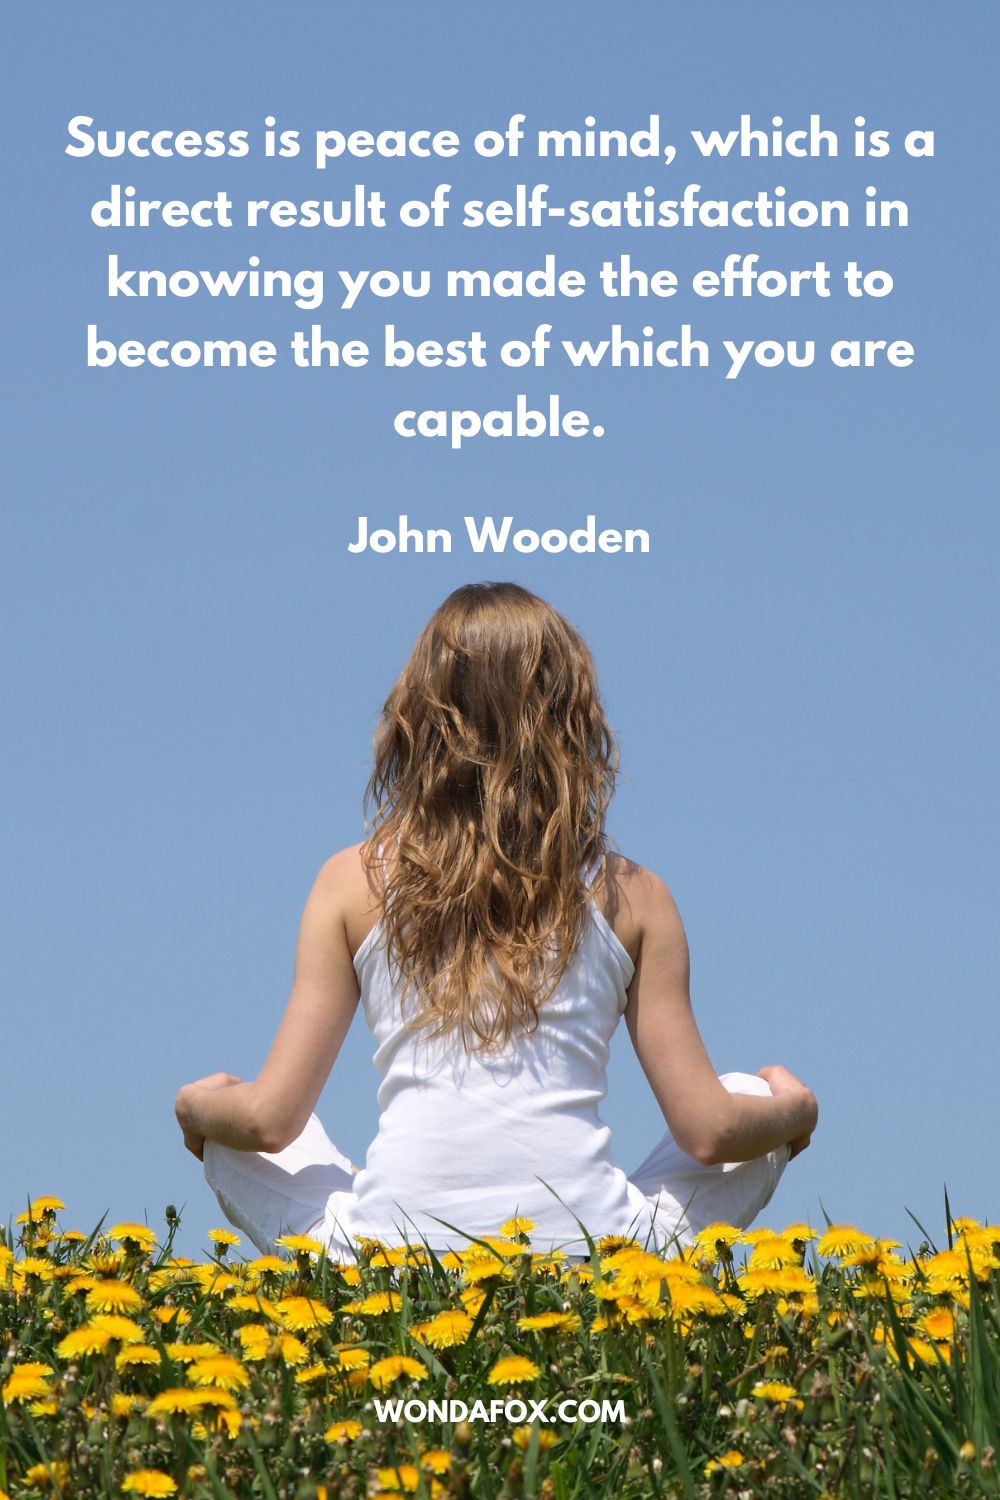 Success is peace of mind, which is a direct result of self-satisfaction in knowing you made the effort to become the best of which you are capable. John Wooden